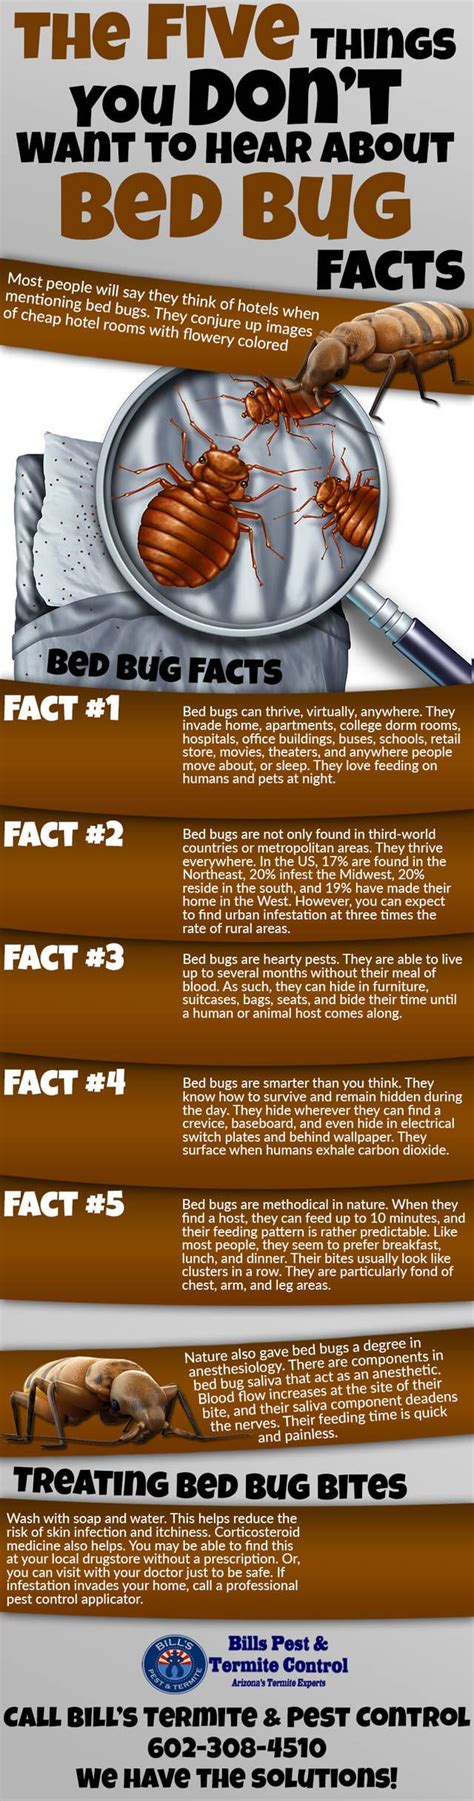 Infographic The 5 Things You Dont Want To Hear About Bed Bugs Bed